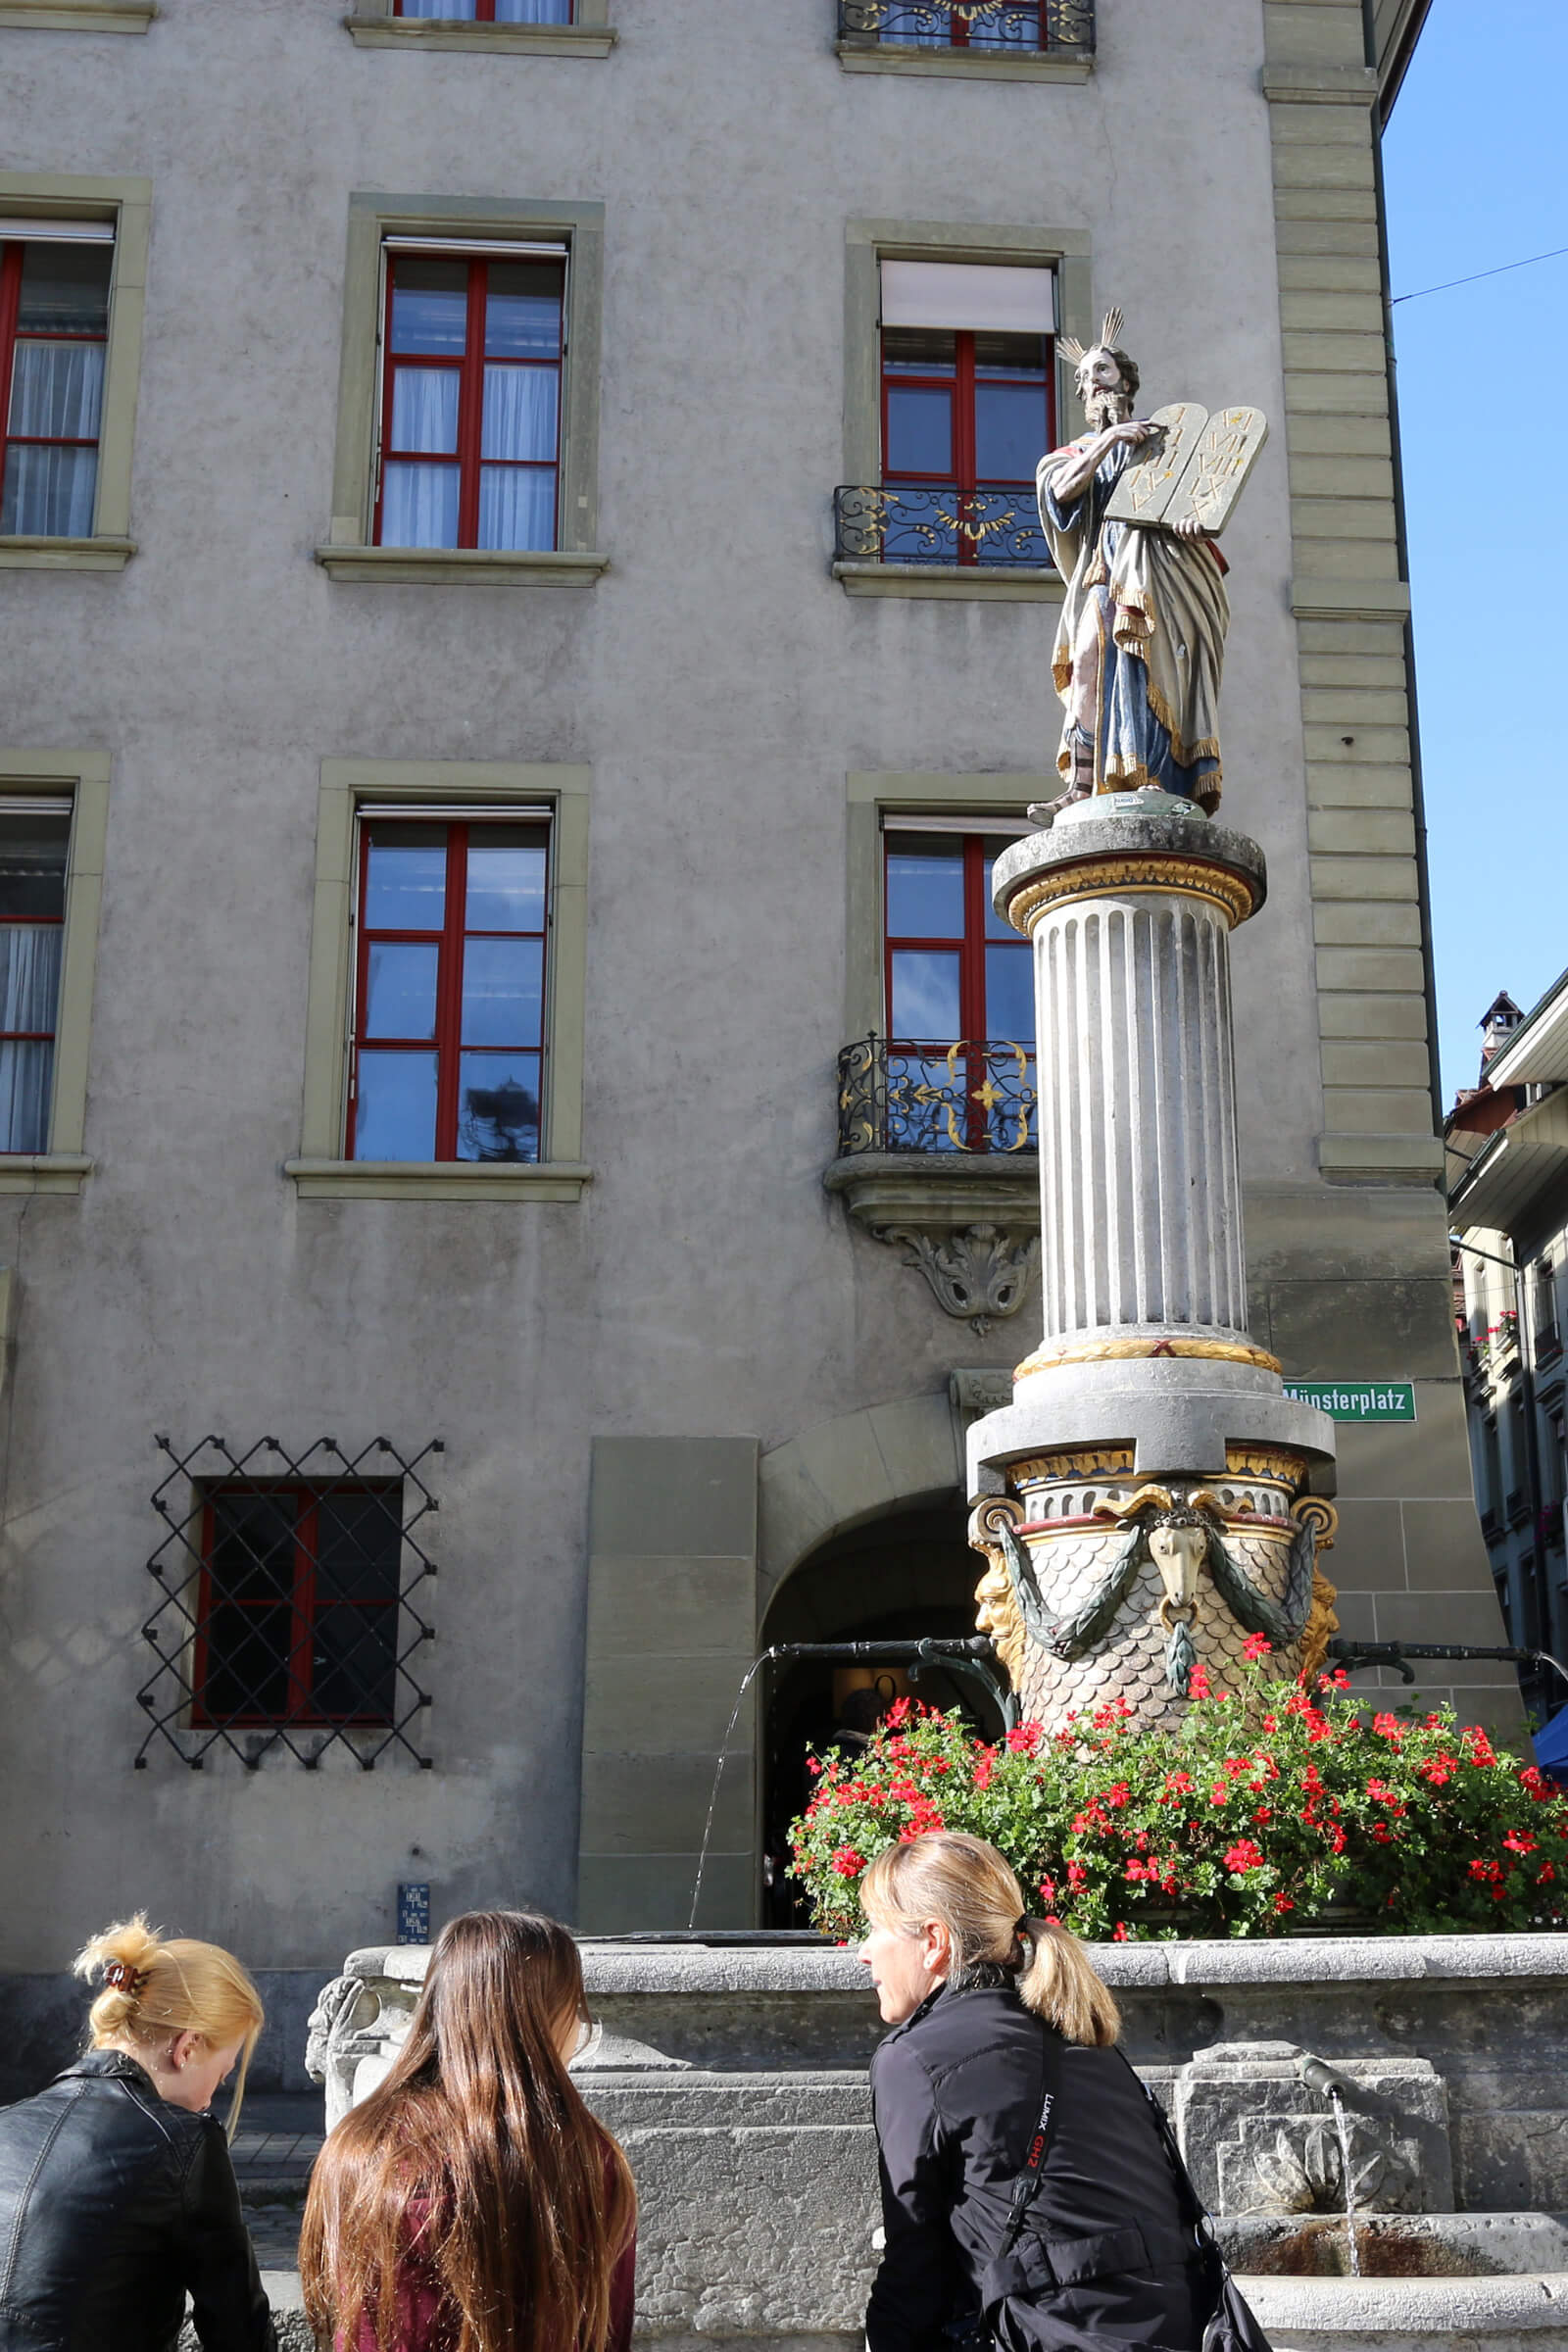 A fountain in the Old Town of Bern